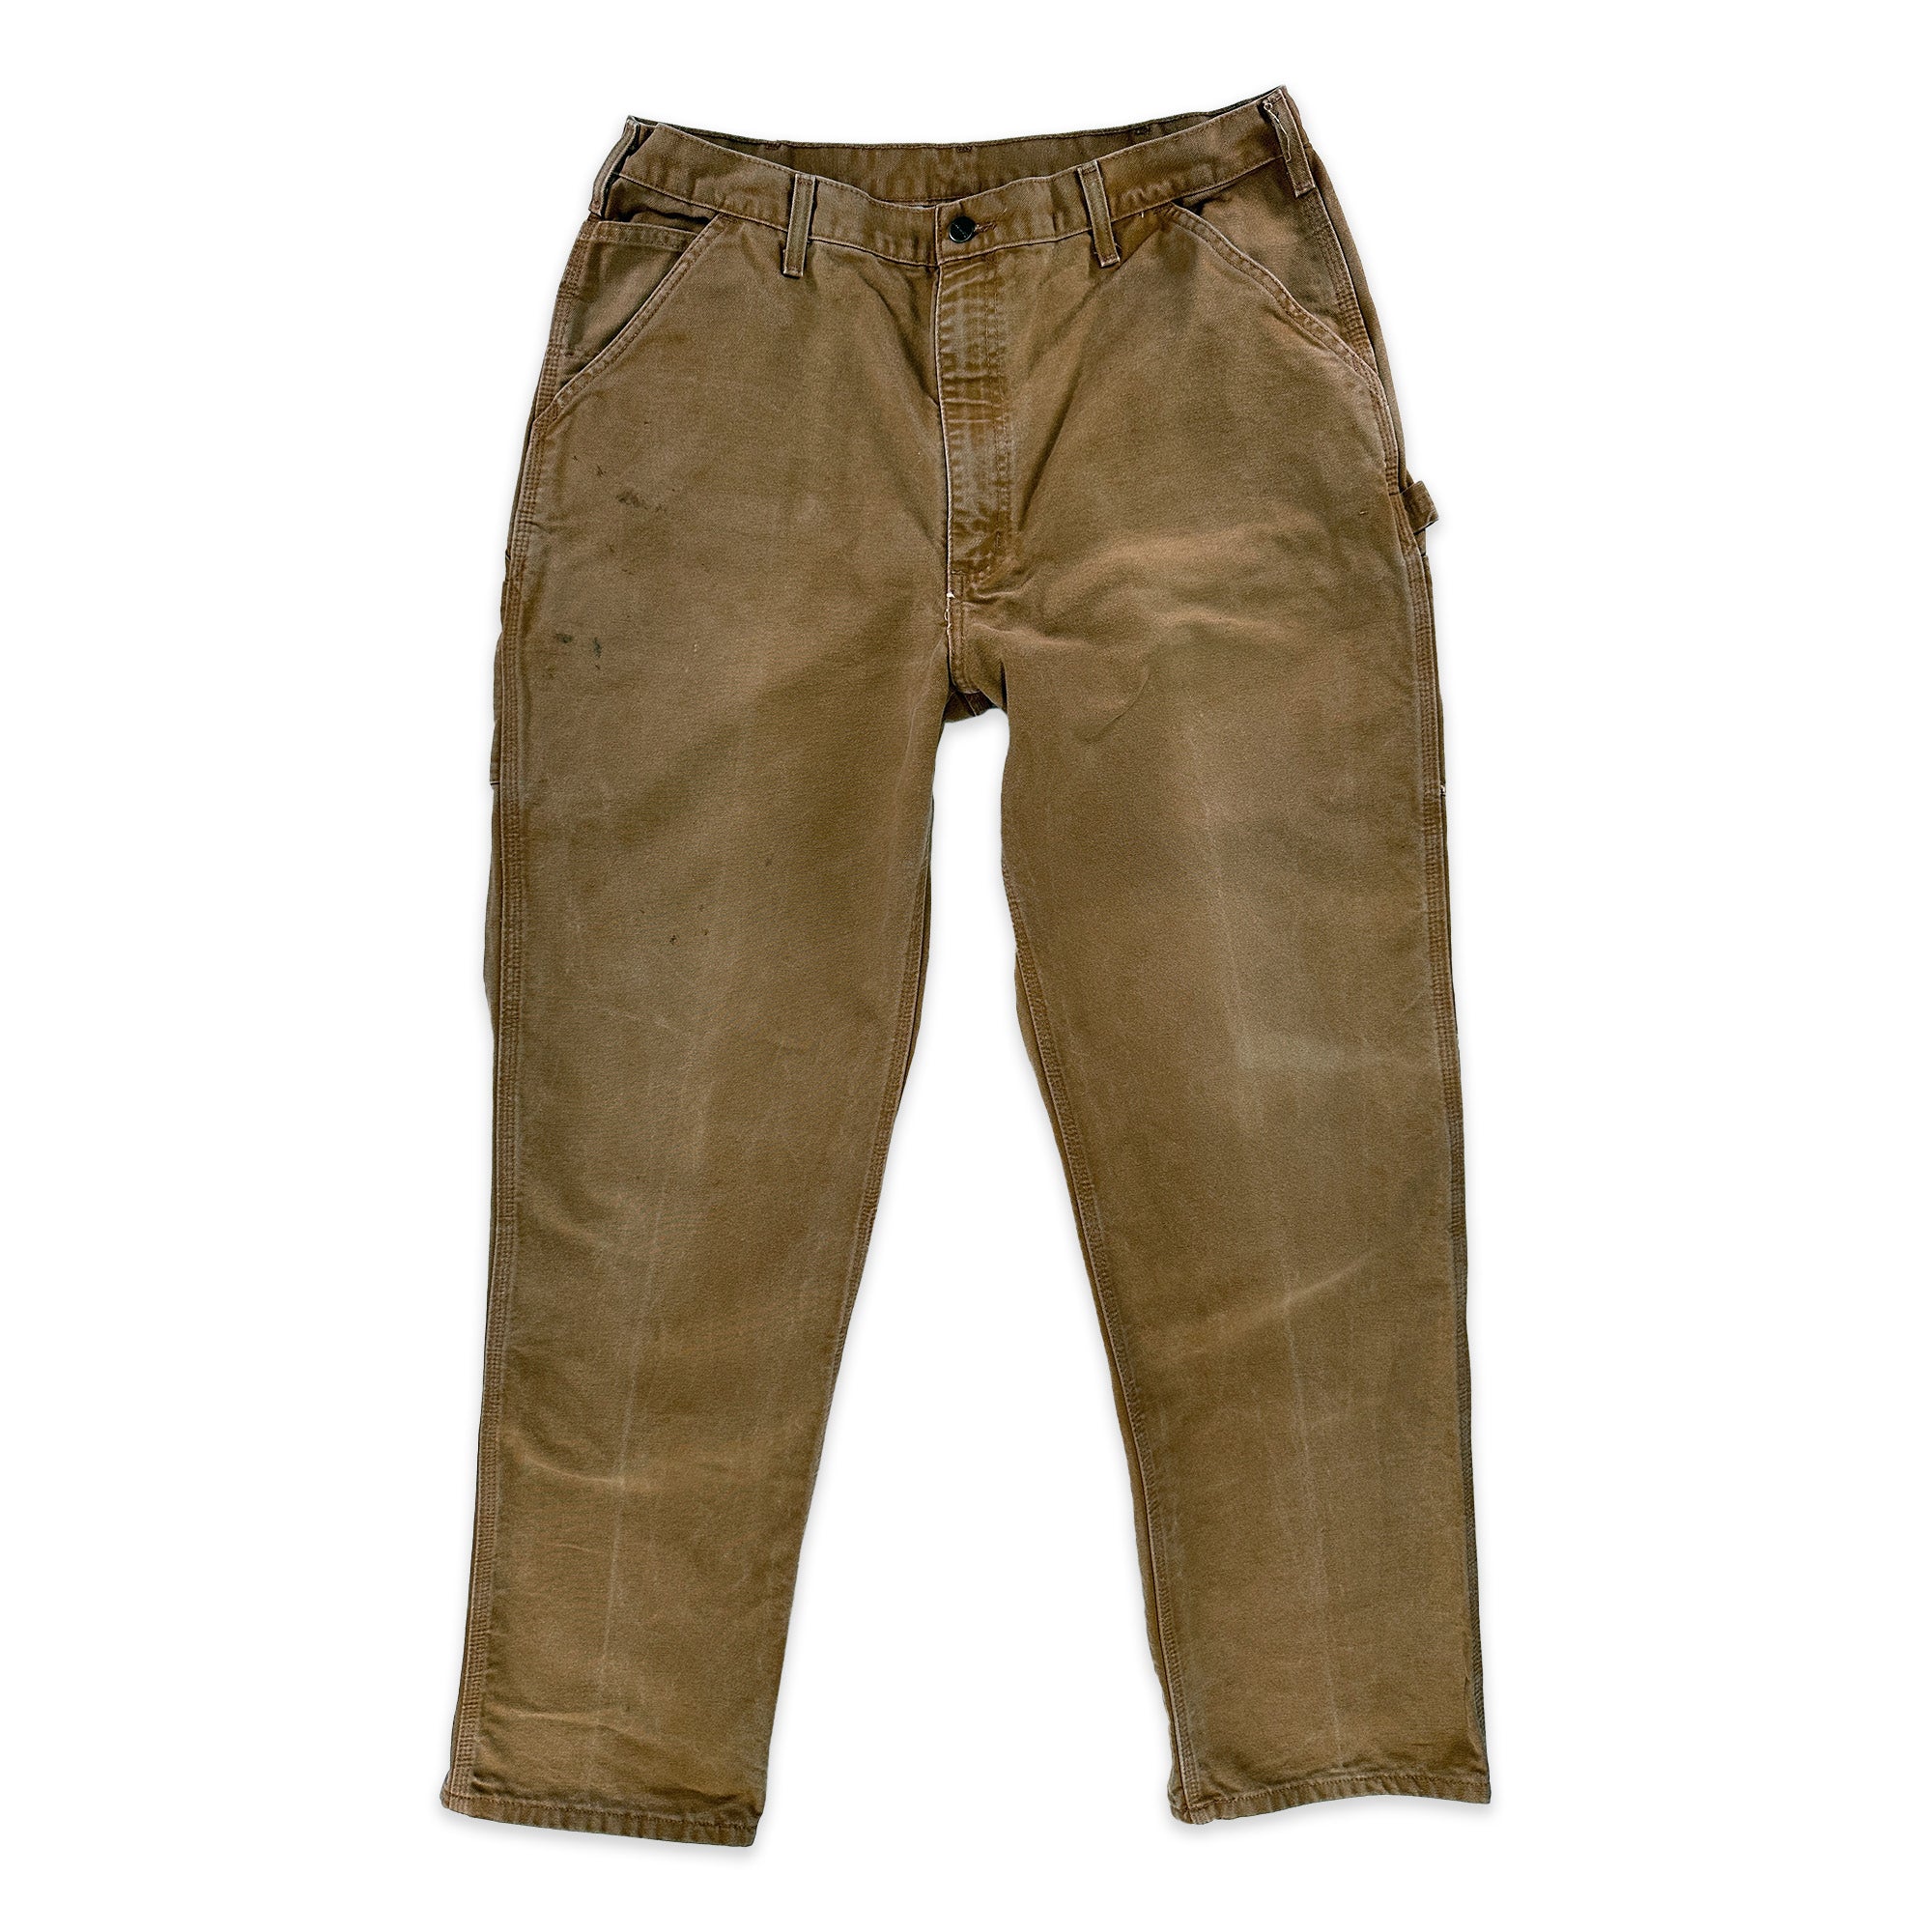 Carhartt B11 BRN Washed Duck Loose Fit Pant - Men's 36x34